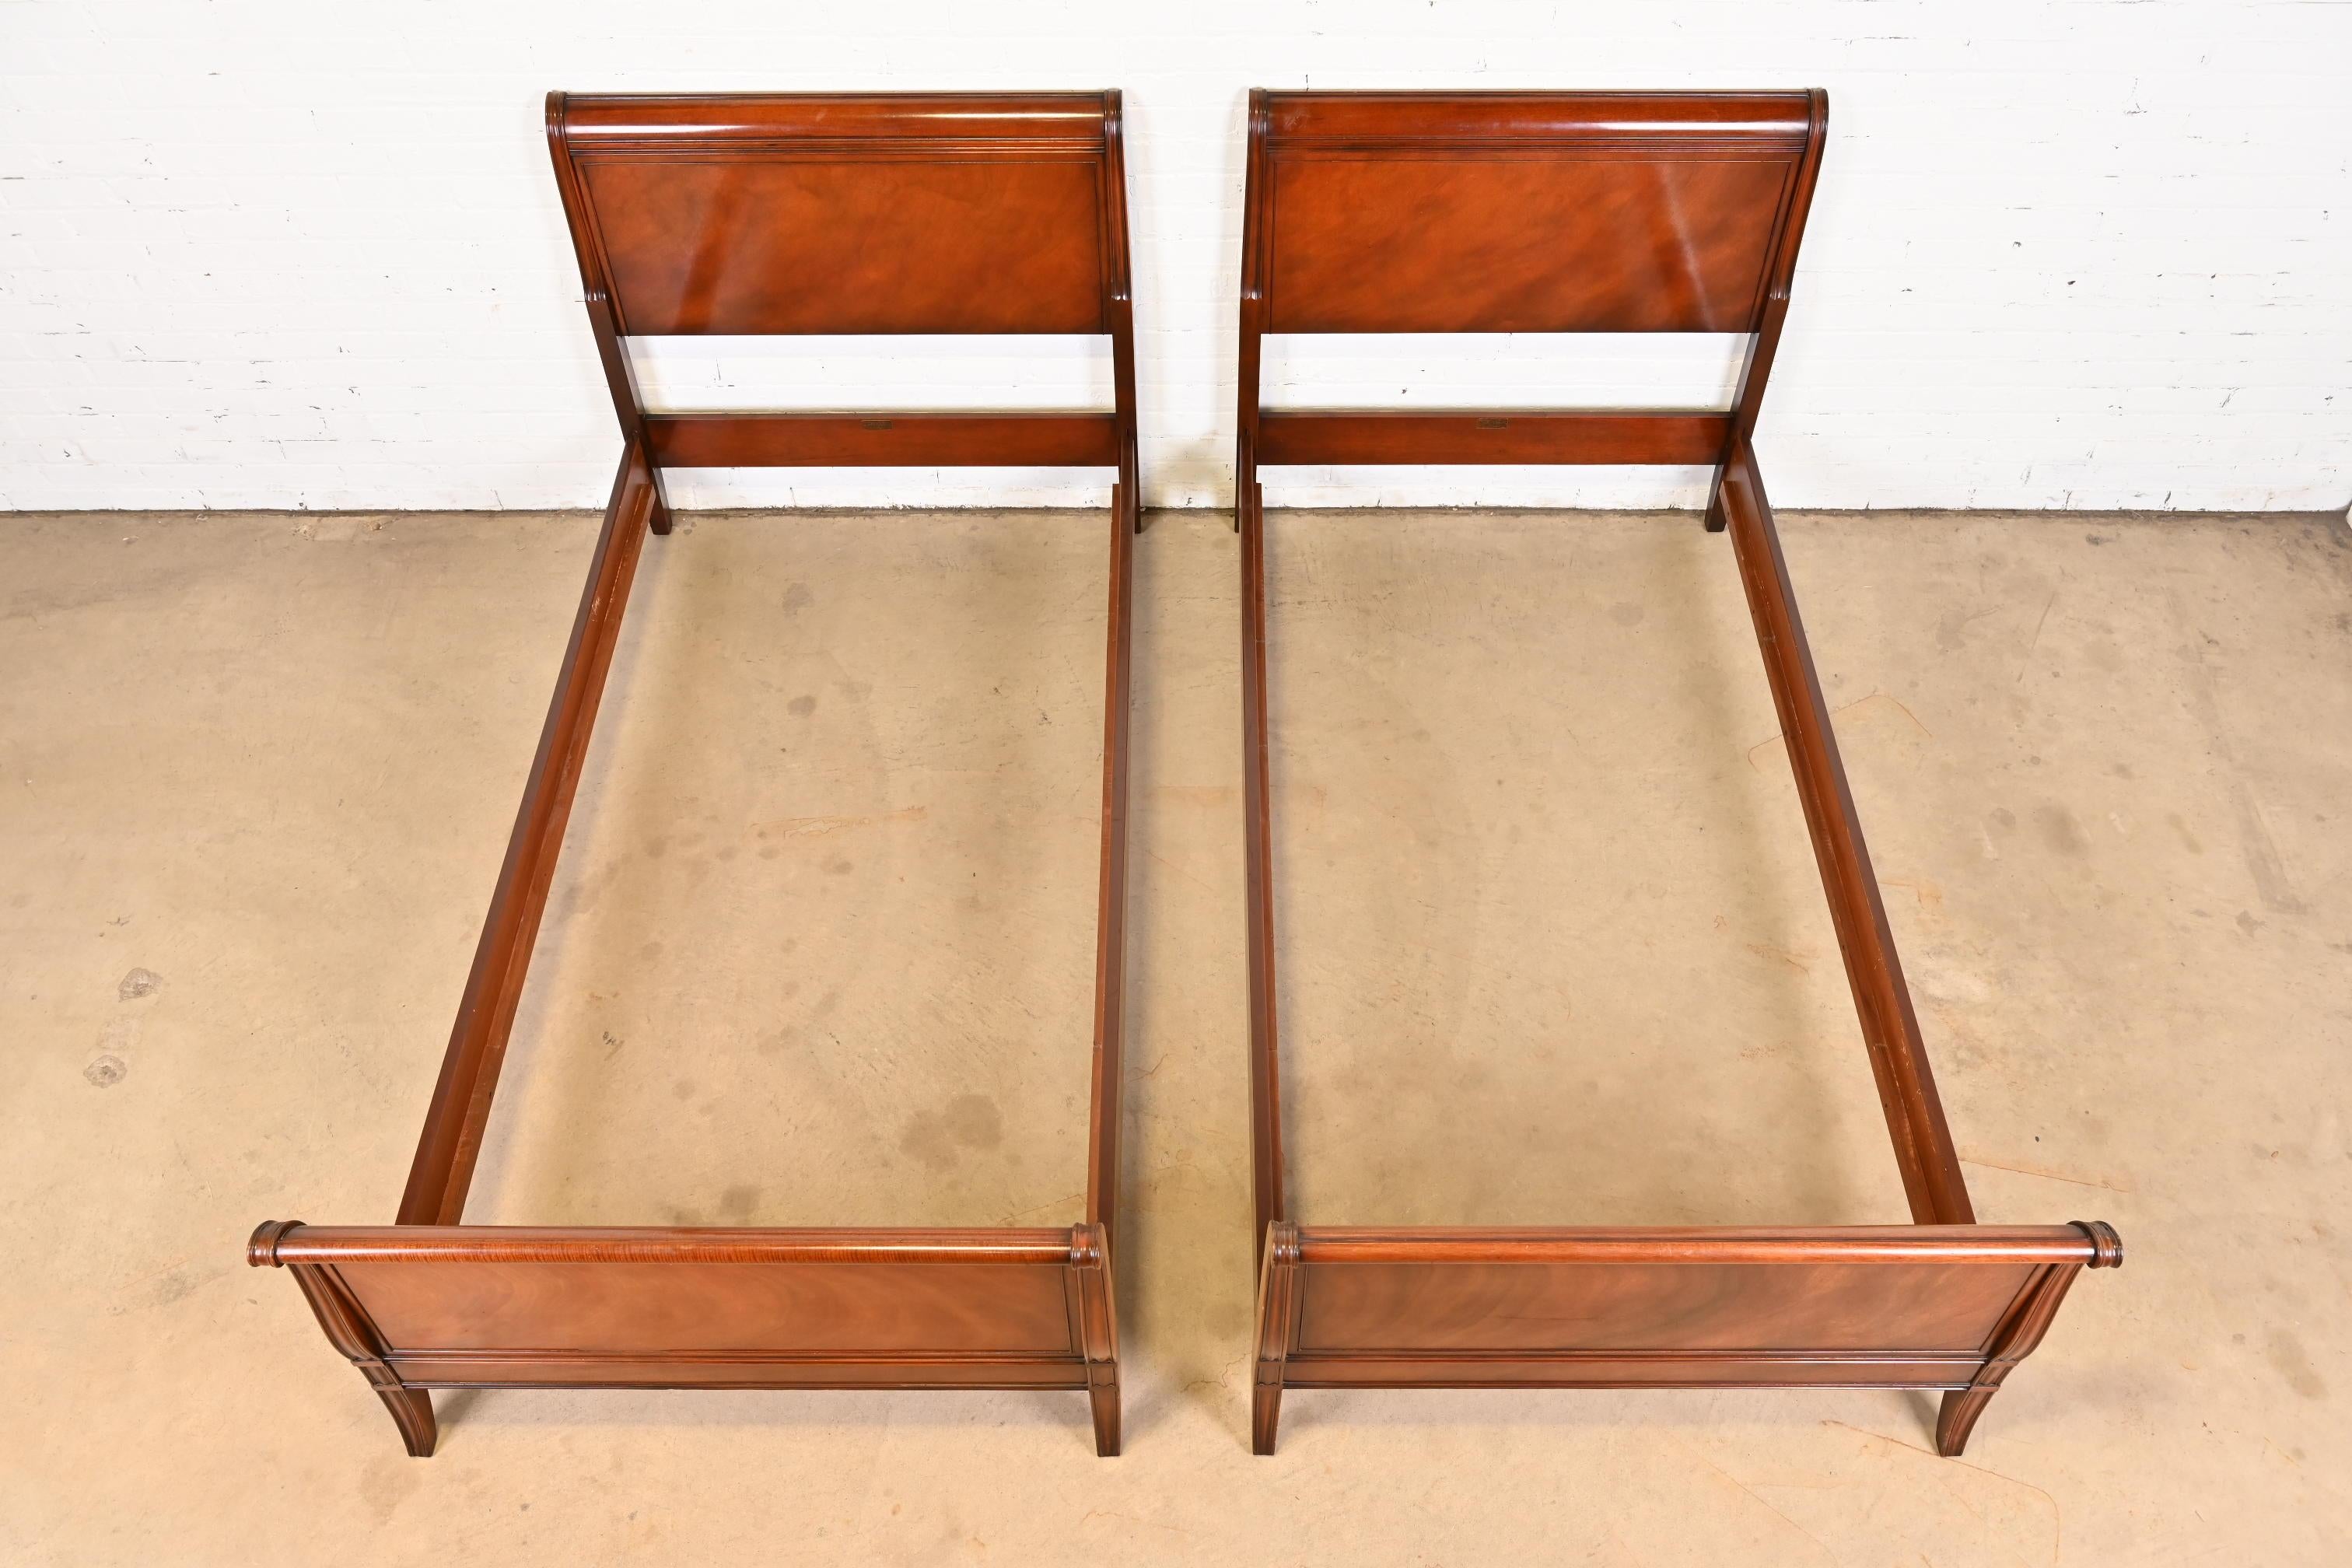 Regency Carved Mahogany Twin Size Sleigh Beds by Fallon & Hellen, circa 1930s 2